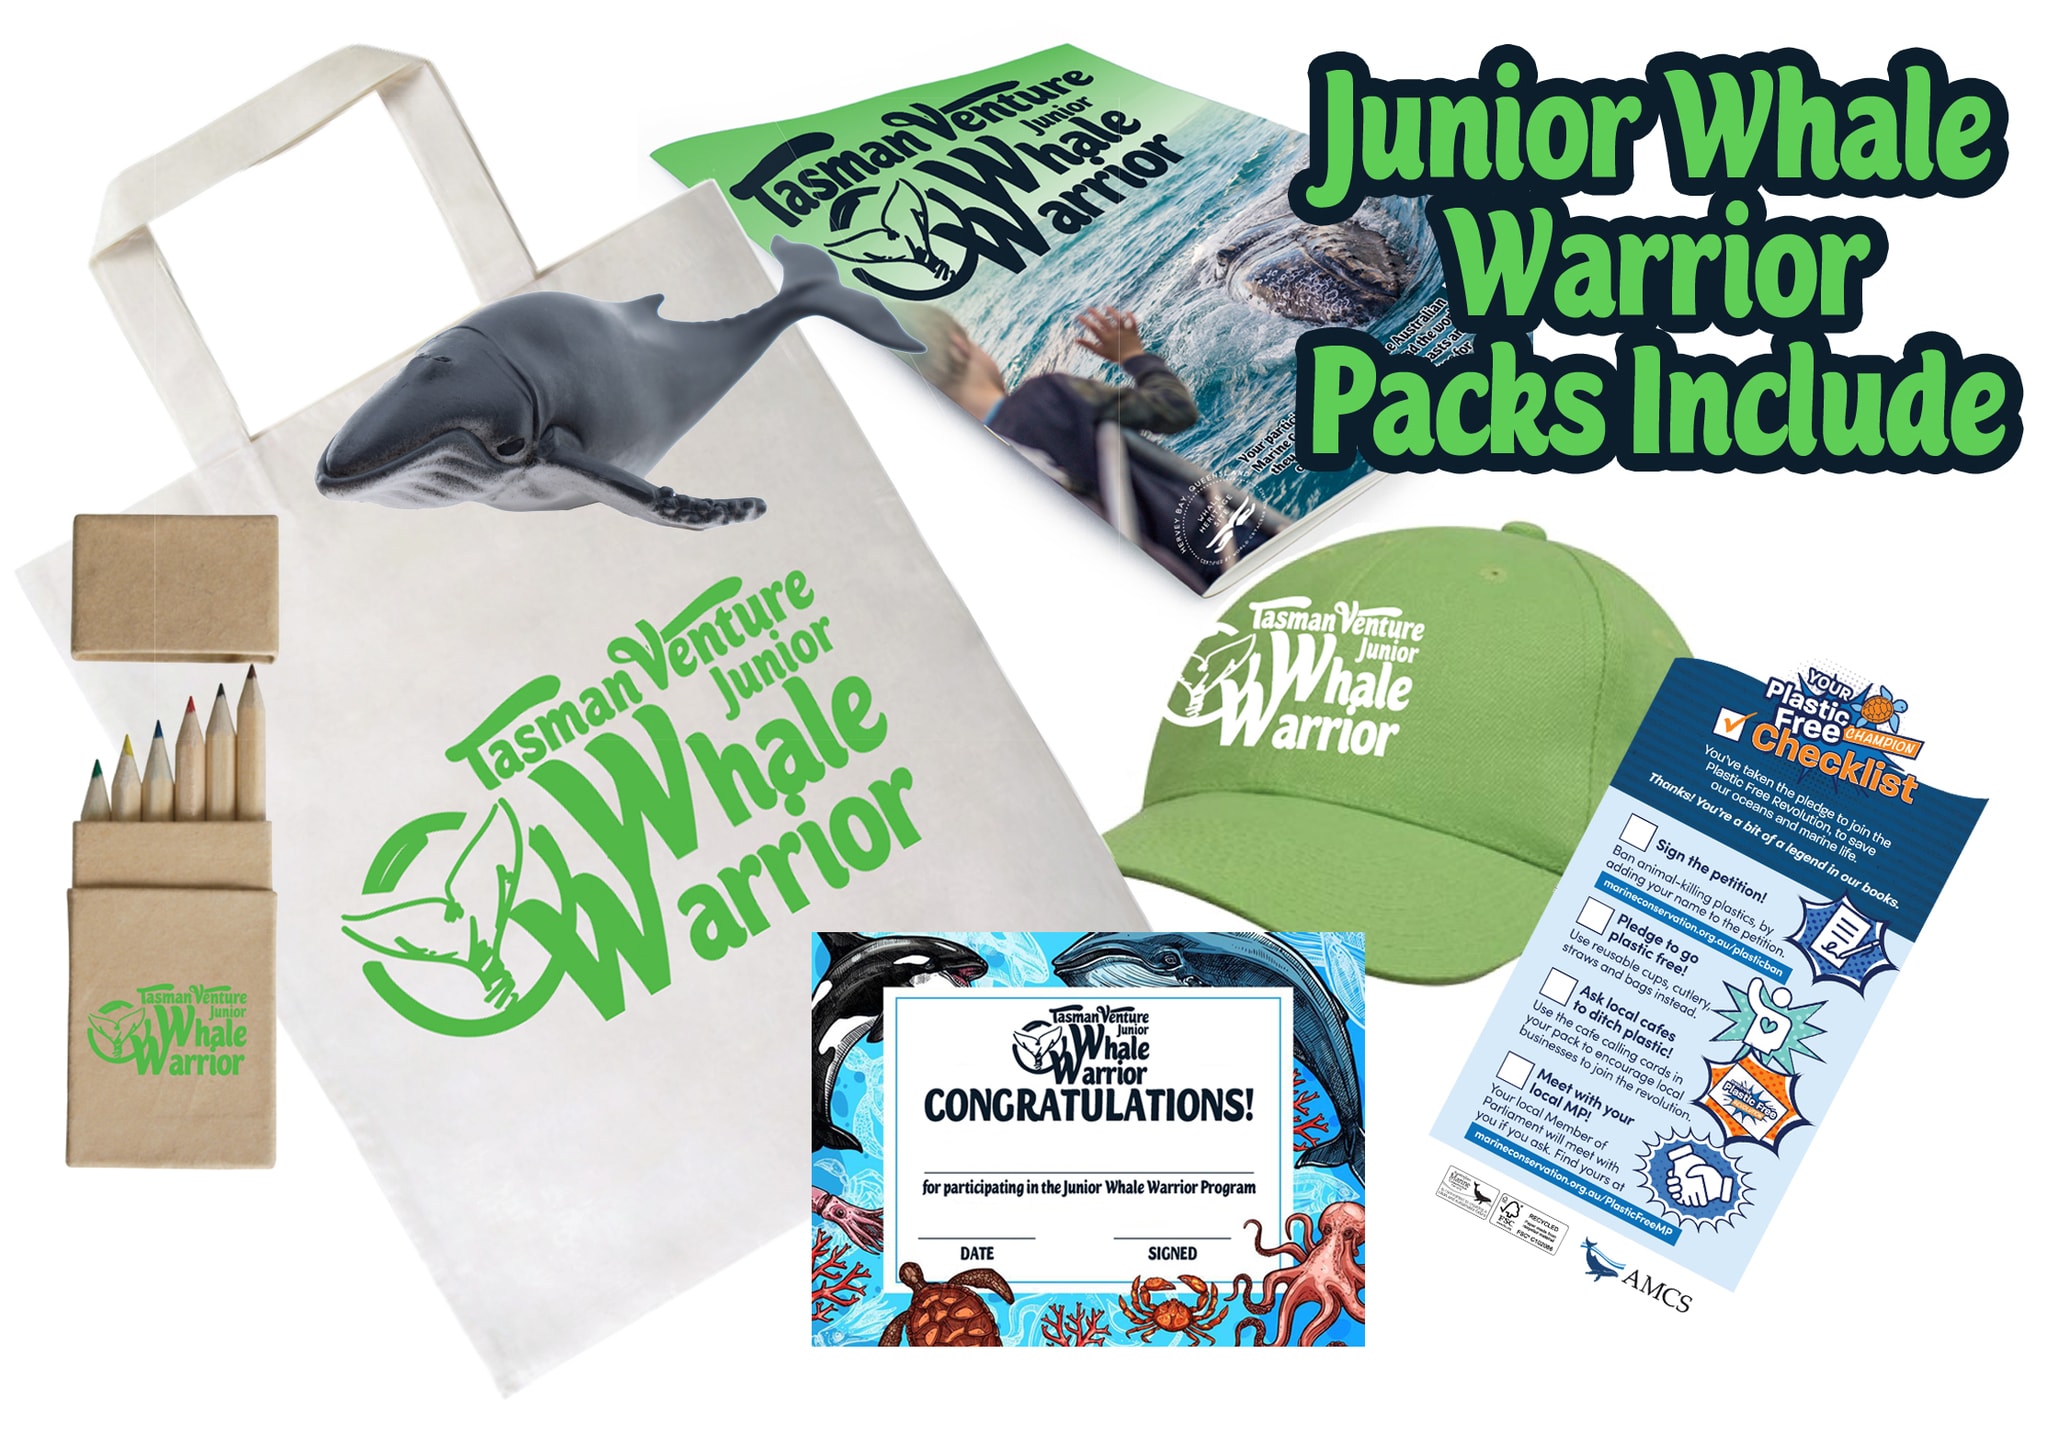 JWW Pack Contents